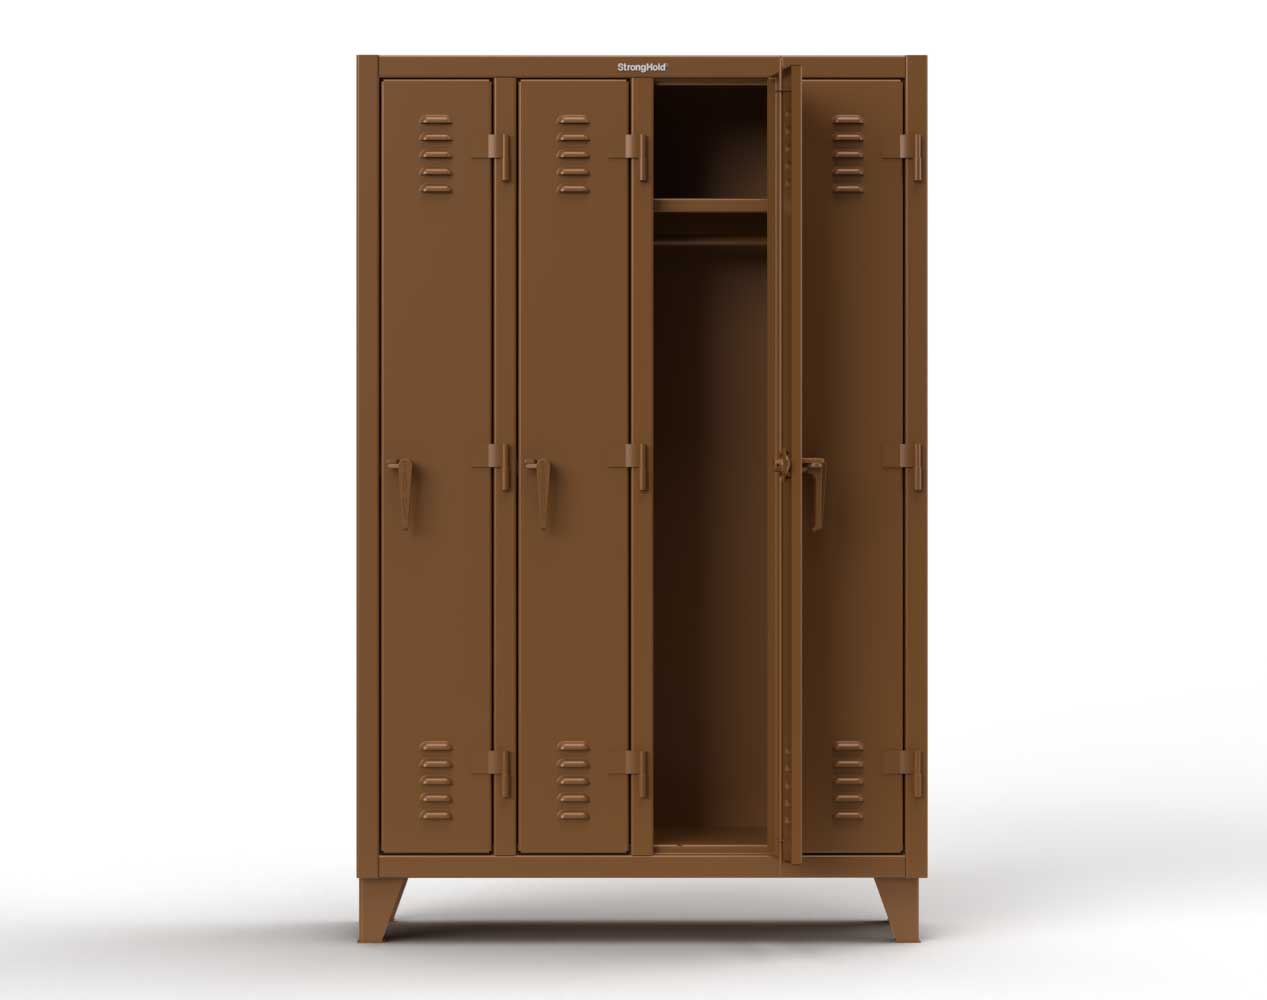 Extreme Duty 12 GA Single-Tier Locker with 4 Compartments, Louvered Doors, Wardrobe Rod - 50 in. W x 18in. D x 78 in. H